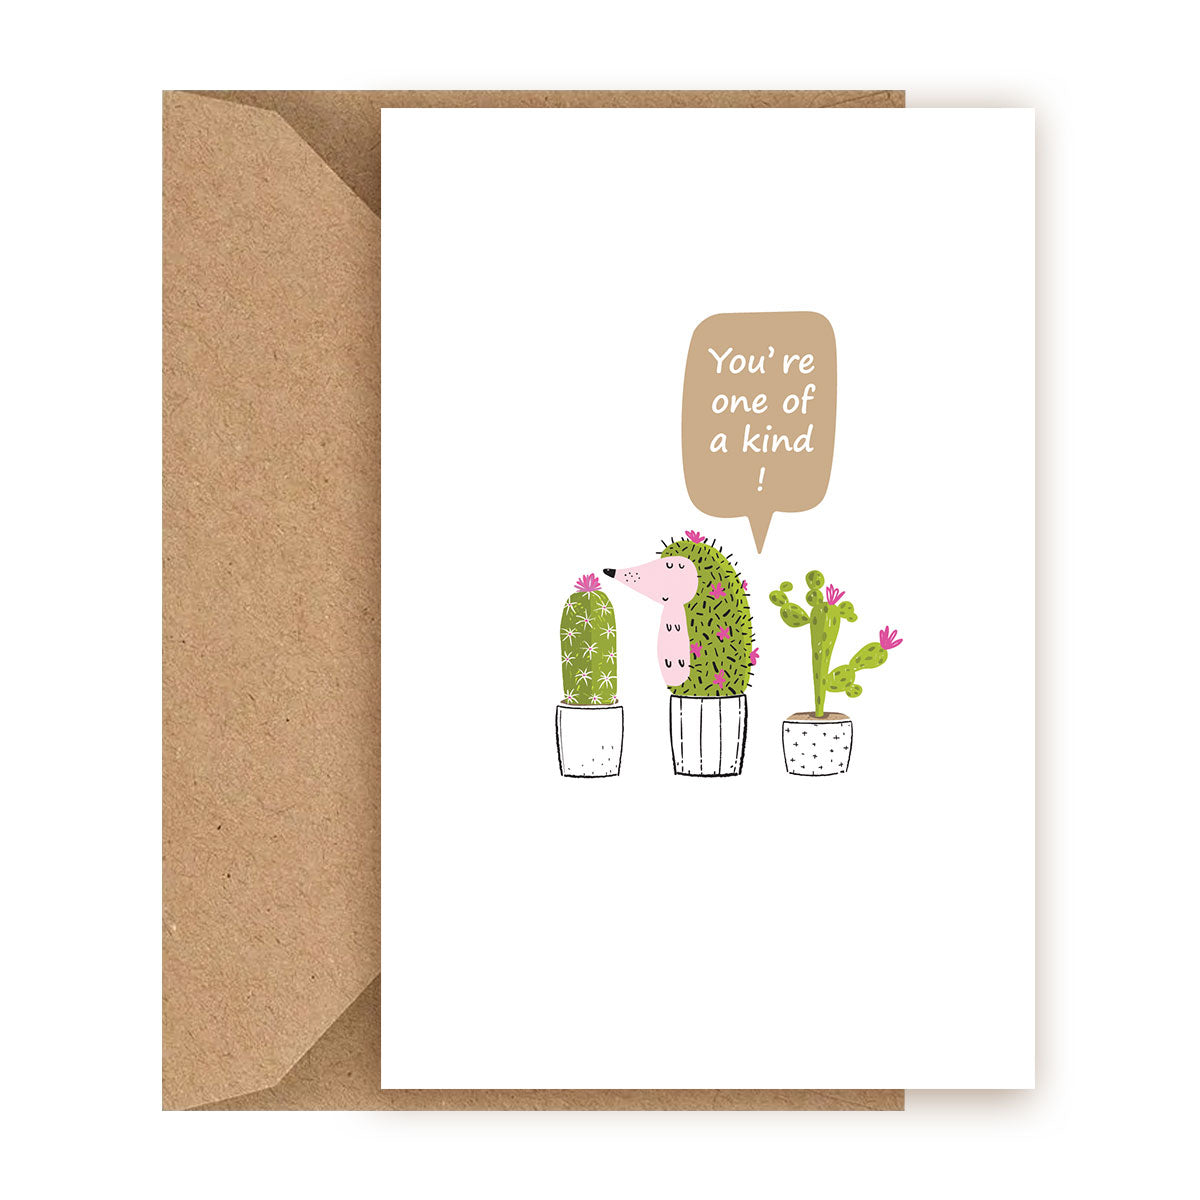 You Are One of A Kind Card, Succulent Card for sale, Cactus Greeting Card, Succulents Greeting Card, Succulents Gift Ideas